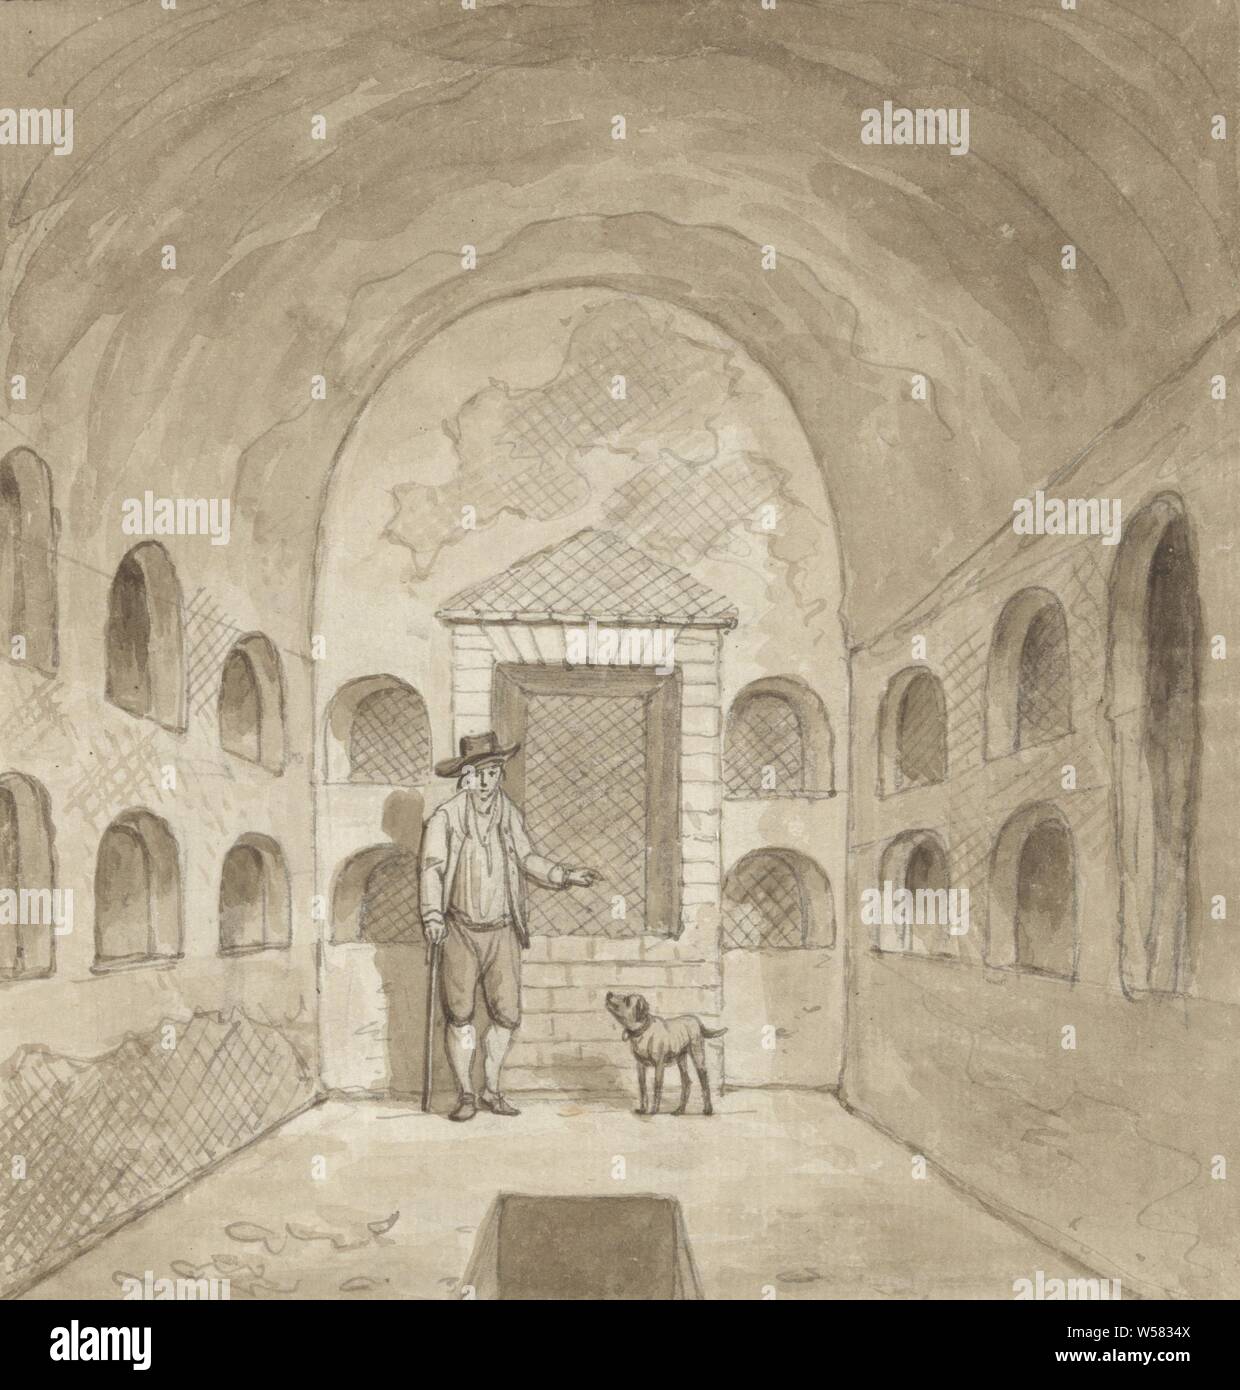 A guide in a catacomb near Pozzuoli, Drawing from a group of drawings of landscapes and cityscapes in Italy (Rome, Tivoli, Civita Castellana and Pozzuoli), catacombs, guide (conducted tour), Pozzuoli, Daniel Dupré, Italy, 1761 - 1817, paper, ink, chalk, brush, h 163 mm × w 156 mm Stock Photo